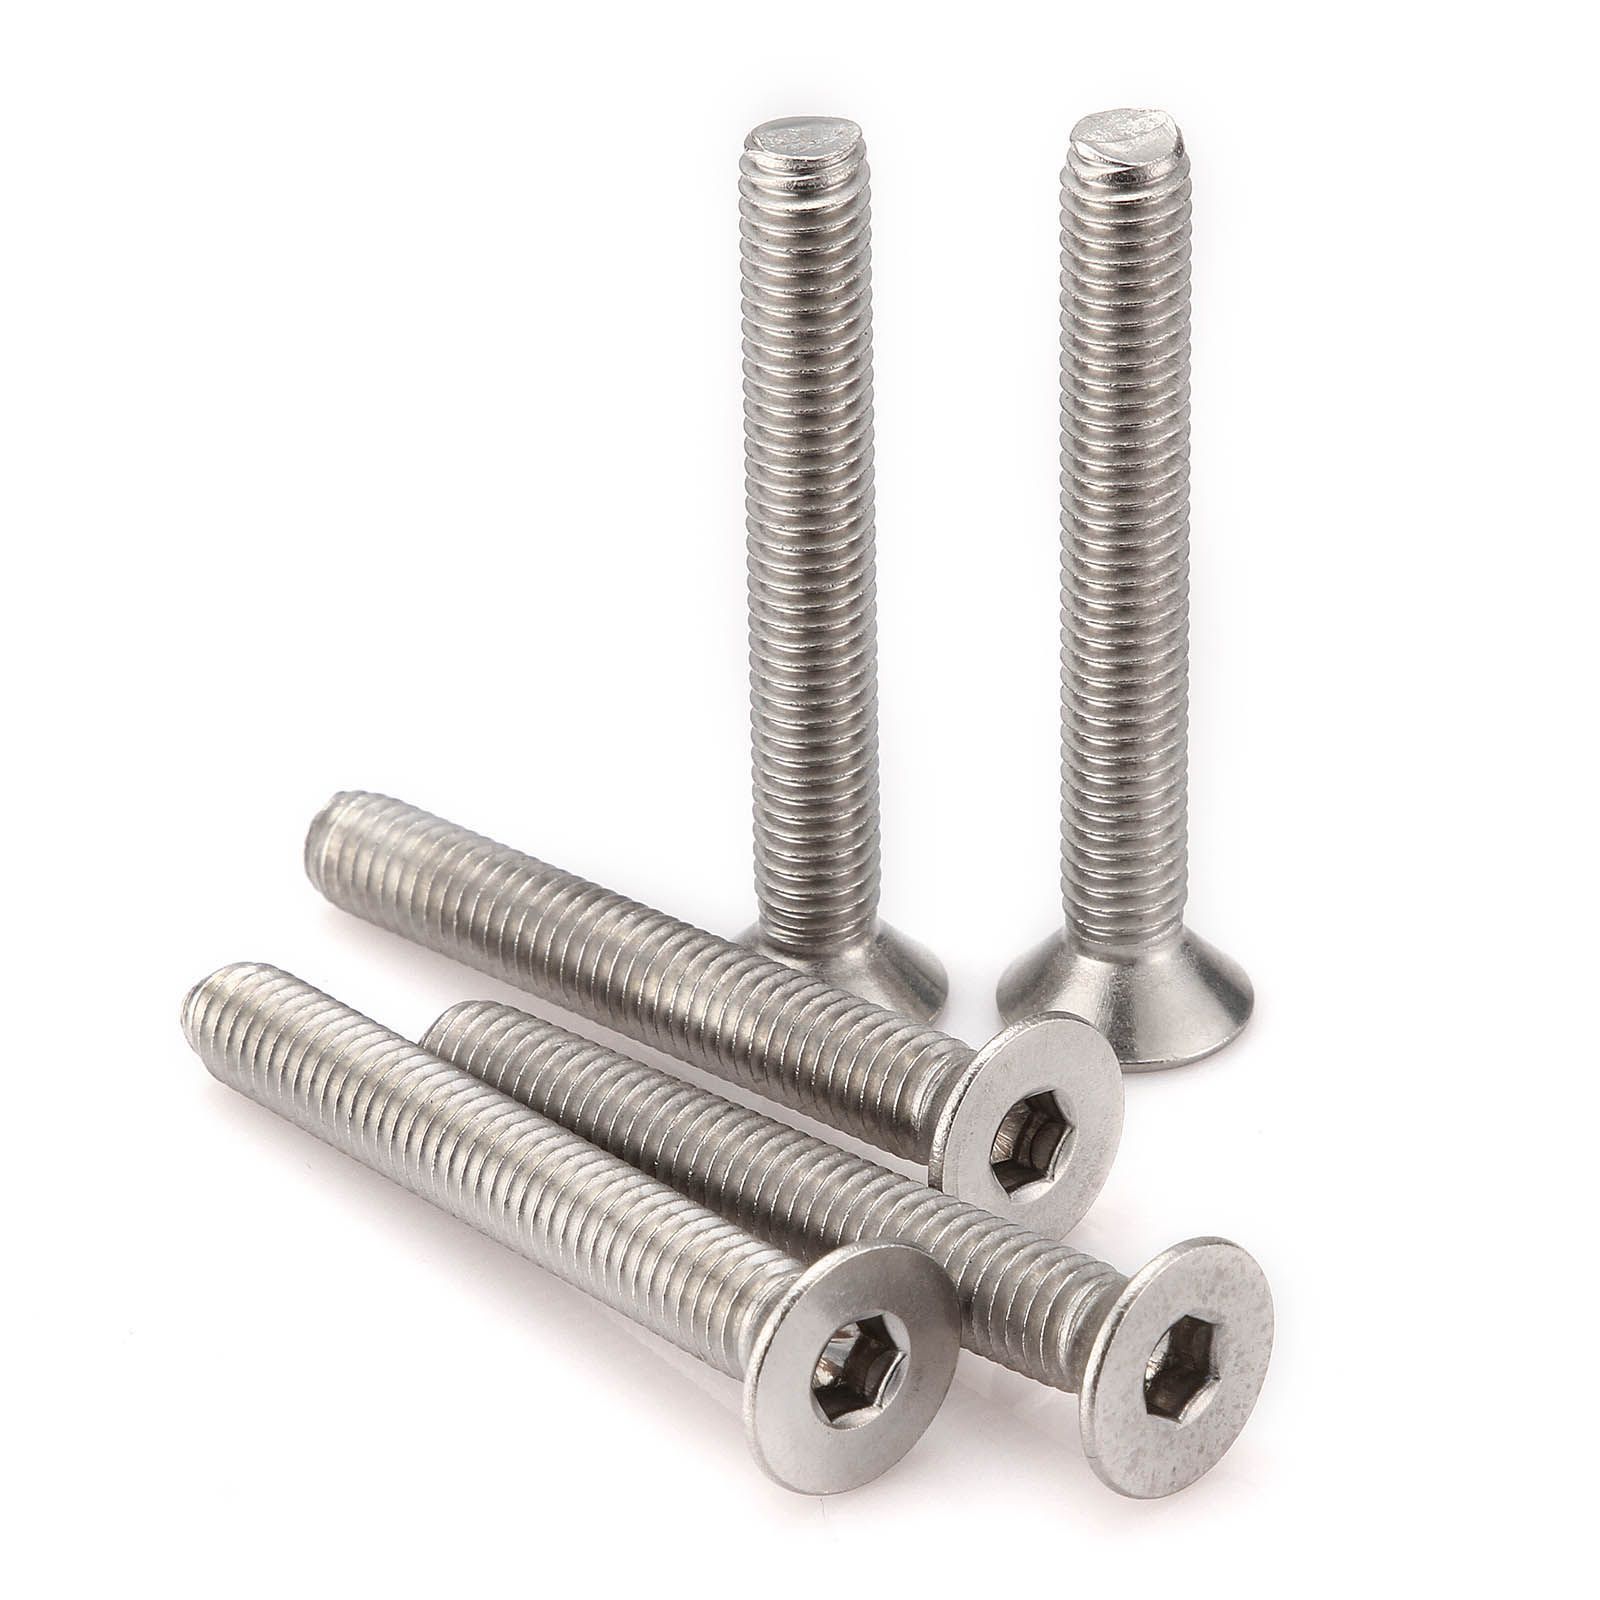 Wholesale Brand New 100pcs M6 Hexagon Countersunk Screws Flat Head Bolts A2 304 Stainless Steel Size 10mm 80mm Choose